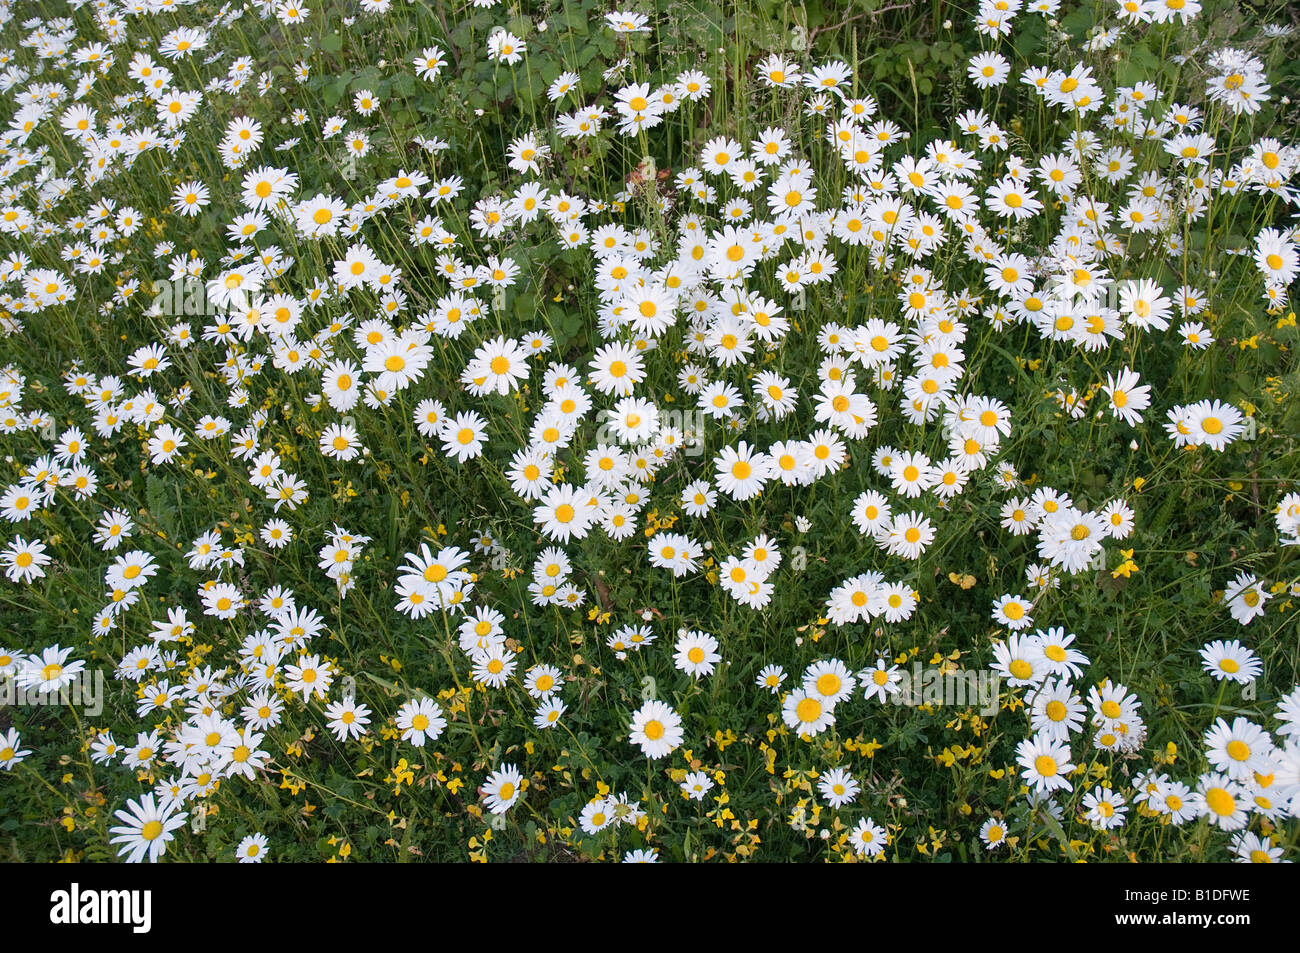 A group of Ox eye daisies with kidney vetch growing underneath Stock Photo